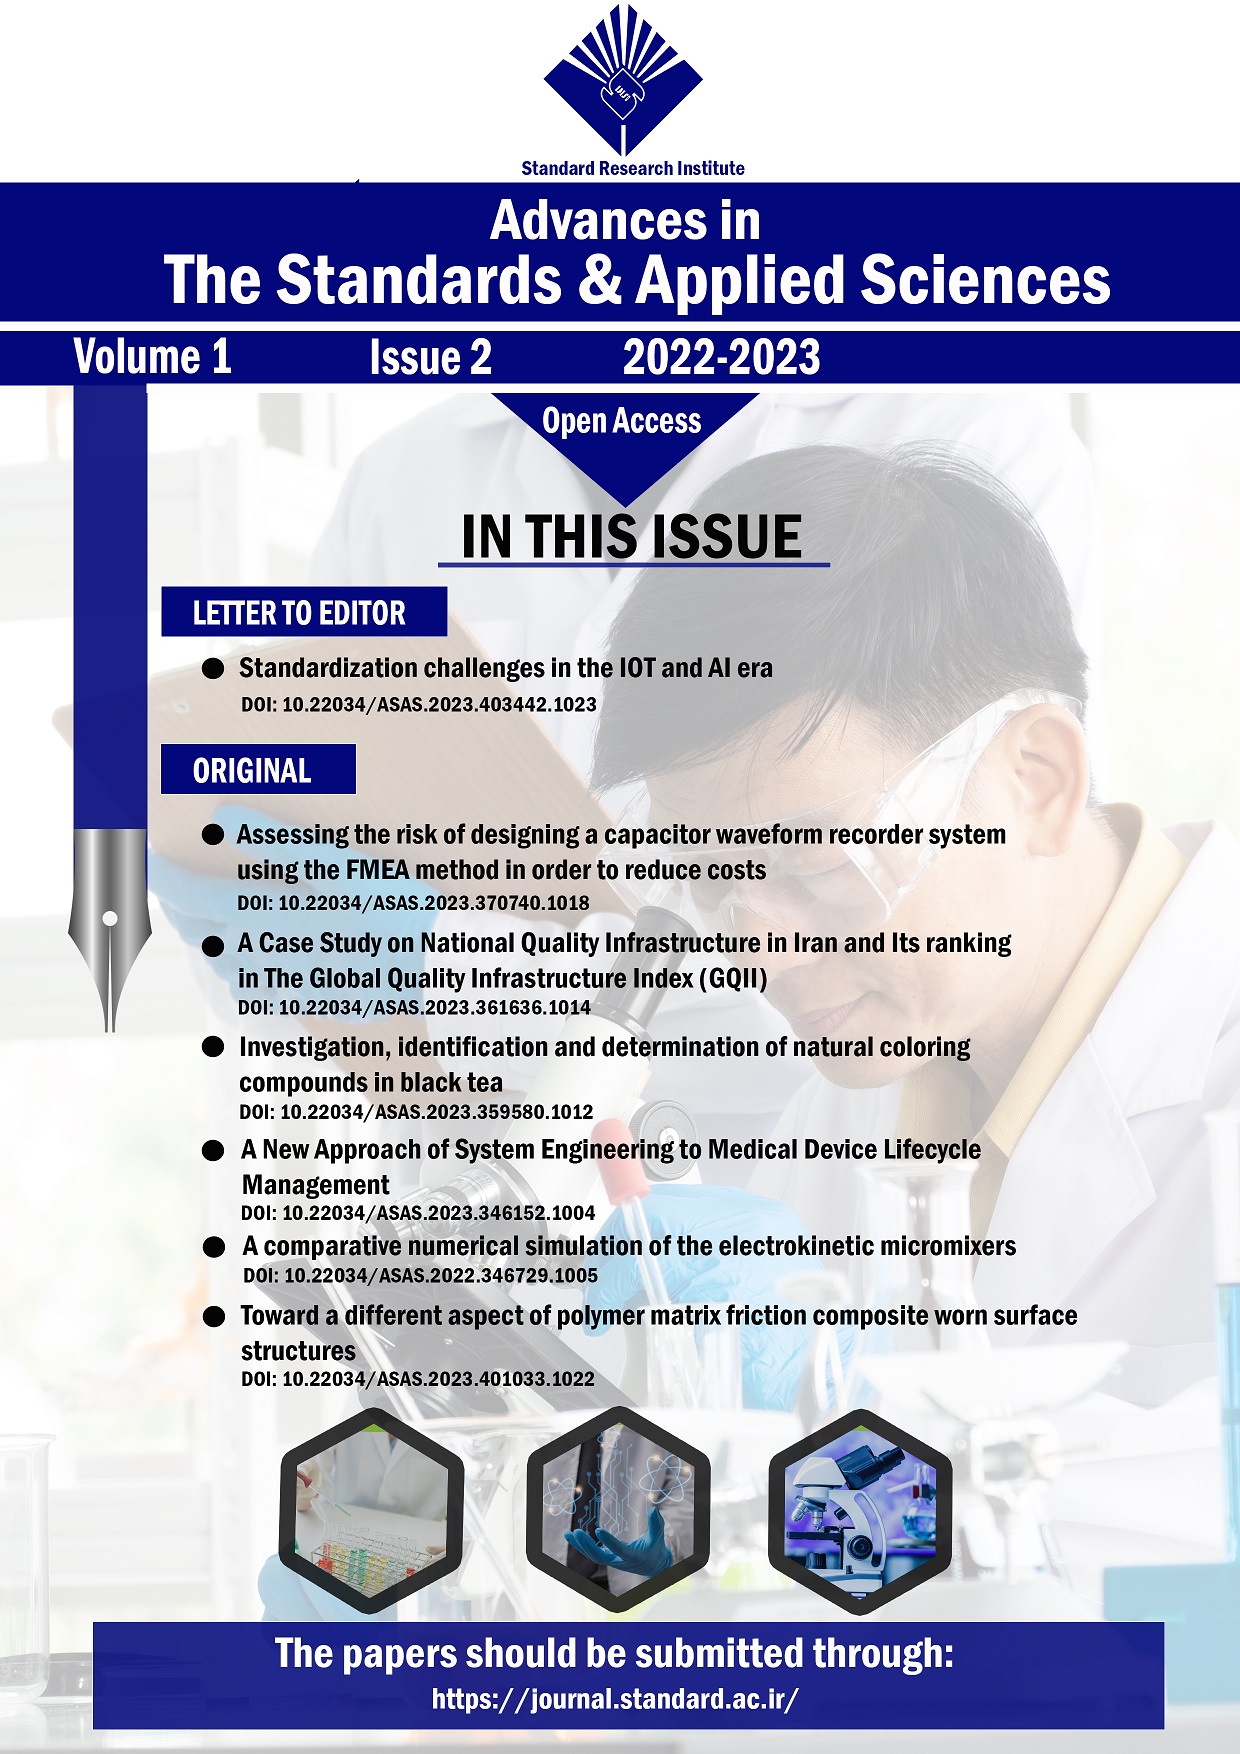 Advances in the Standards & Applied Sciences